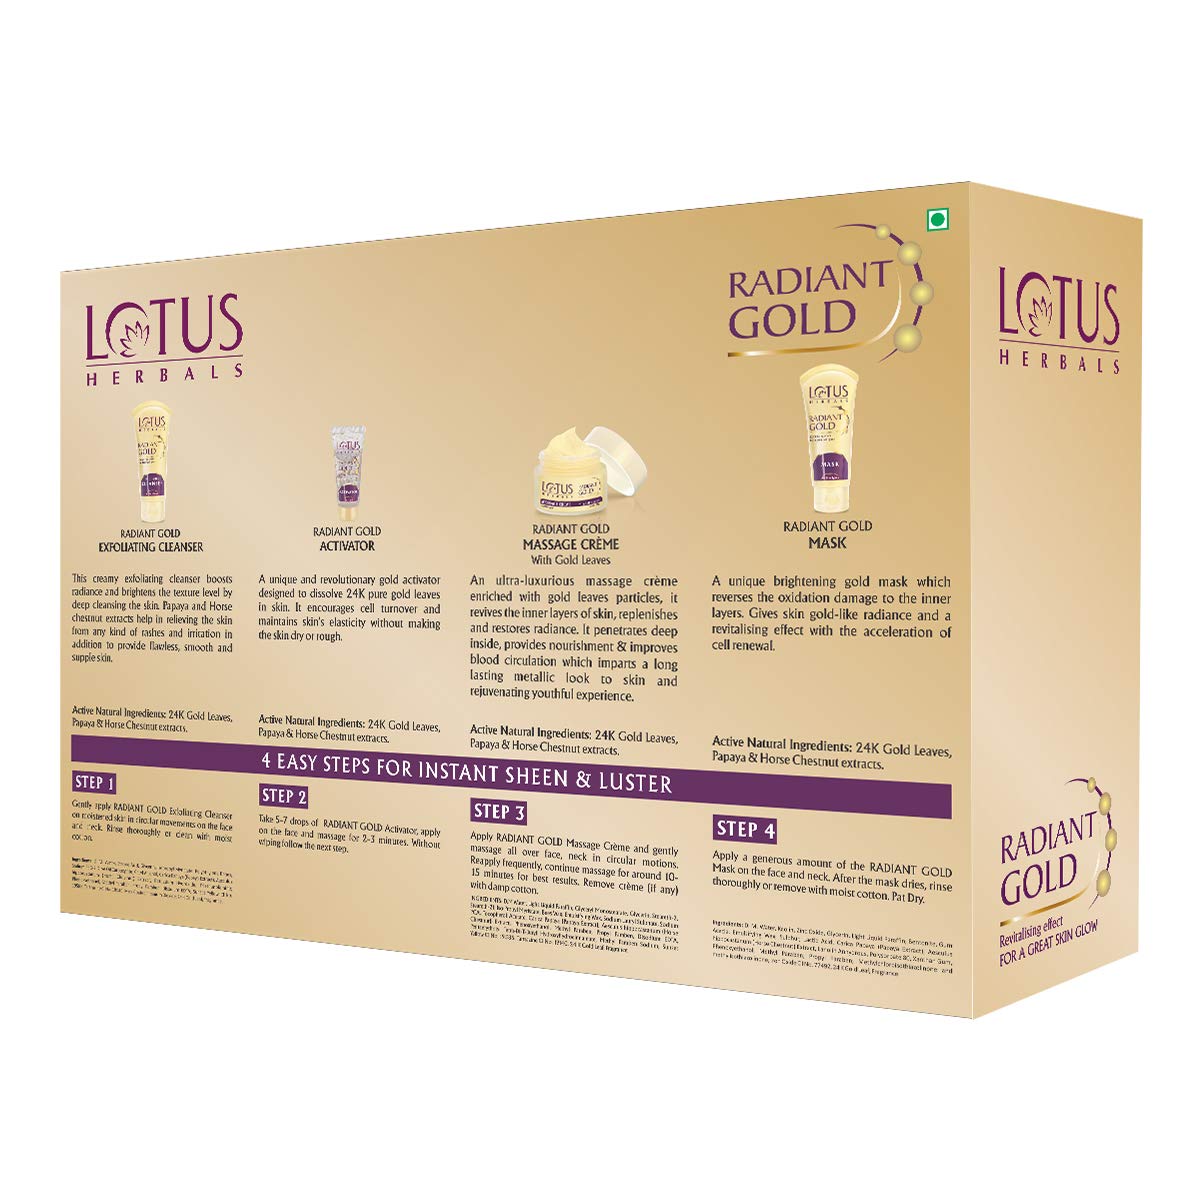 Lotus Radiant Gold Facial Kit for instant glow with 24K Pure Gold & Papaya,4 easy steps , 170g (Multiple use) - image 2 of 6